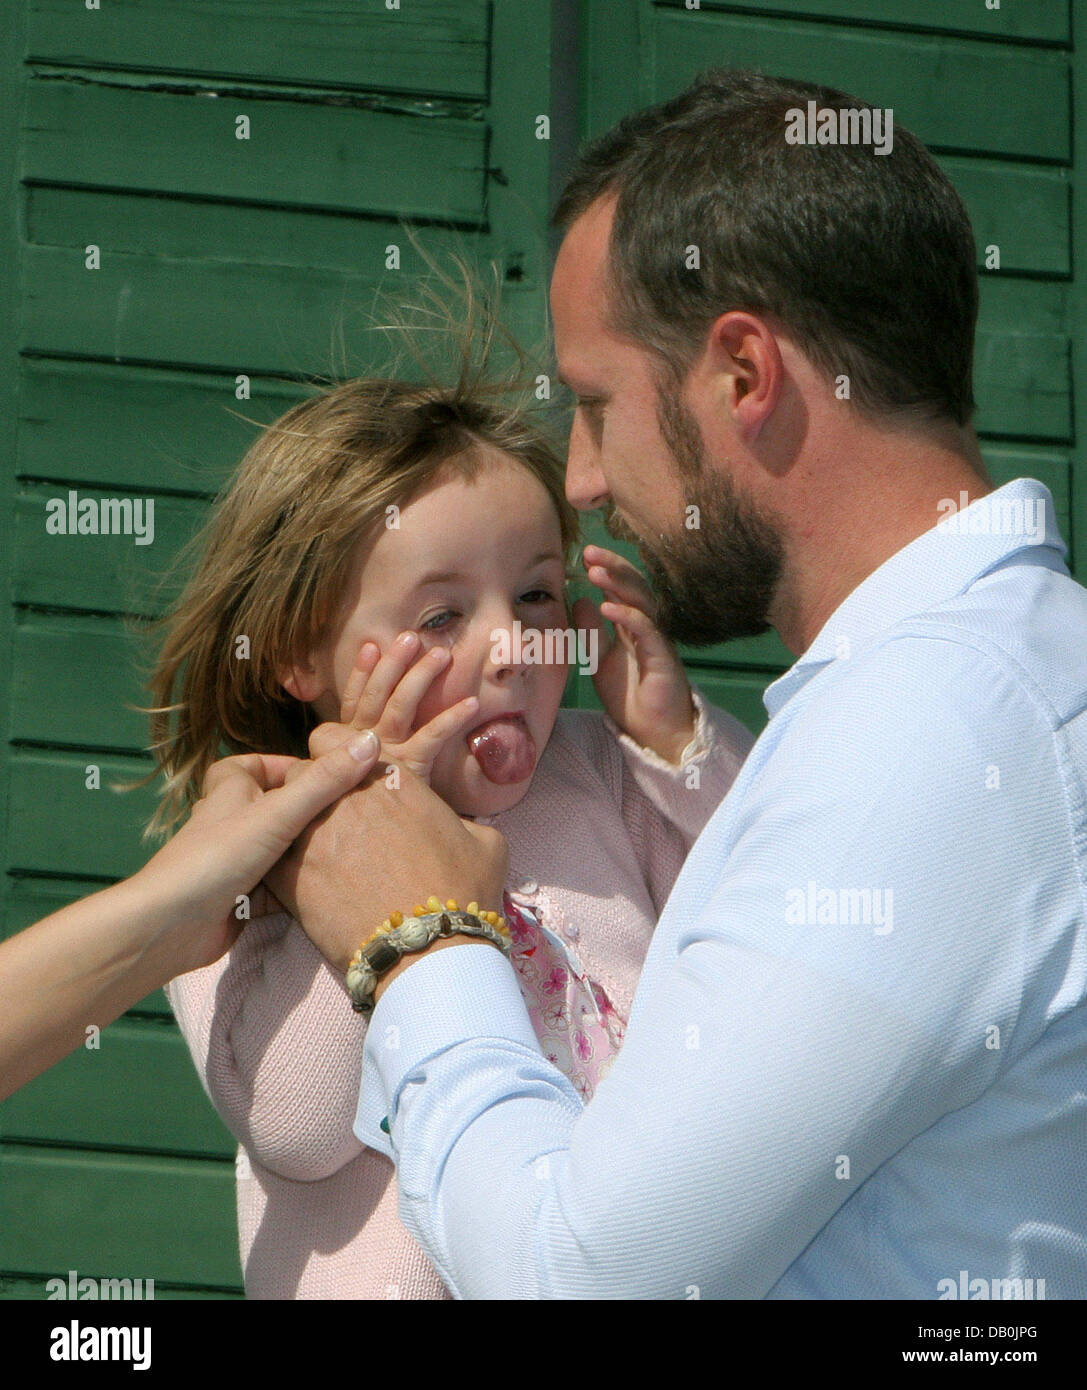 Princess Ingrid Alexandra of Norway (L) grimaces to her father Crown Prince Haakon of Norway (R) in the park of their house in Skaugum, Norway, Monday, 3 September 2007. Photo: Albert Nieboer (NETHERLANDS OUT) Stock Photo